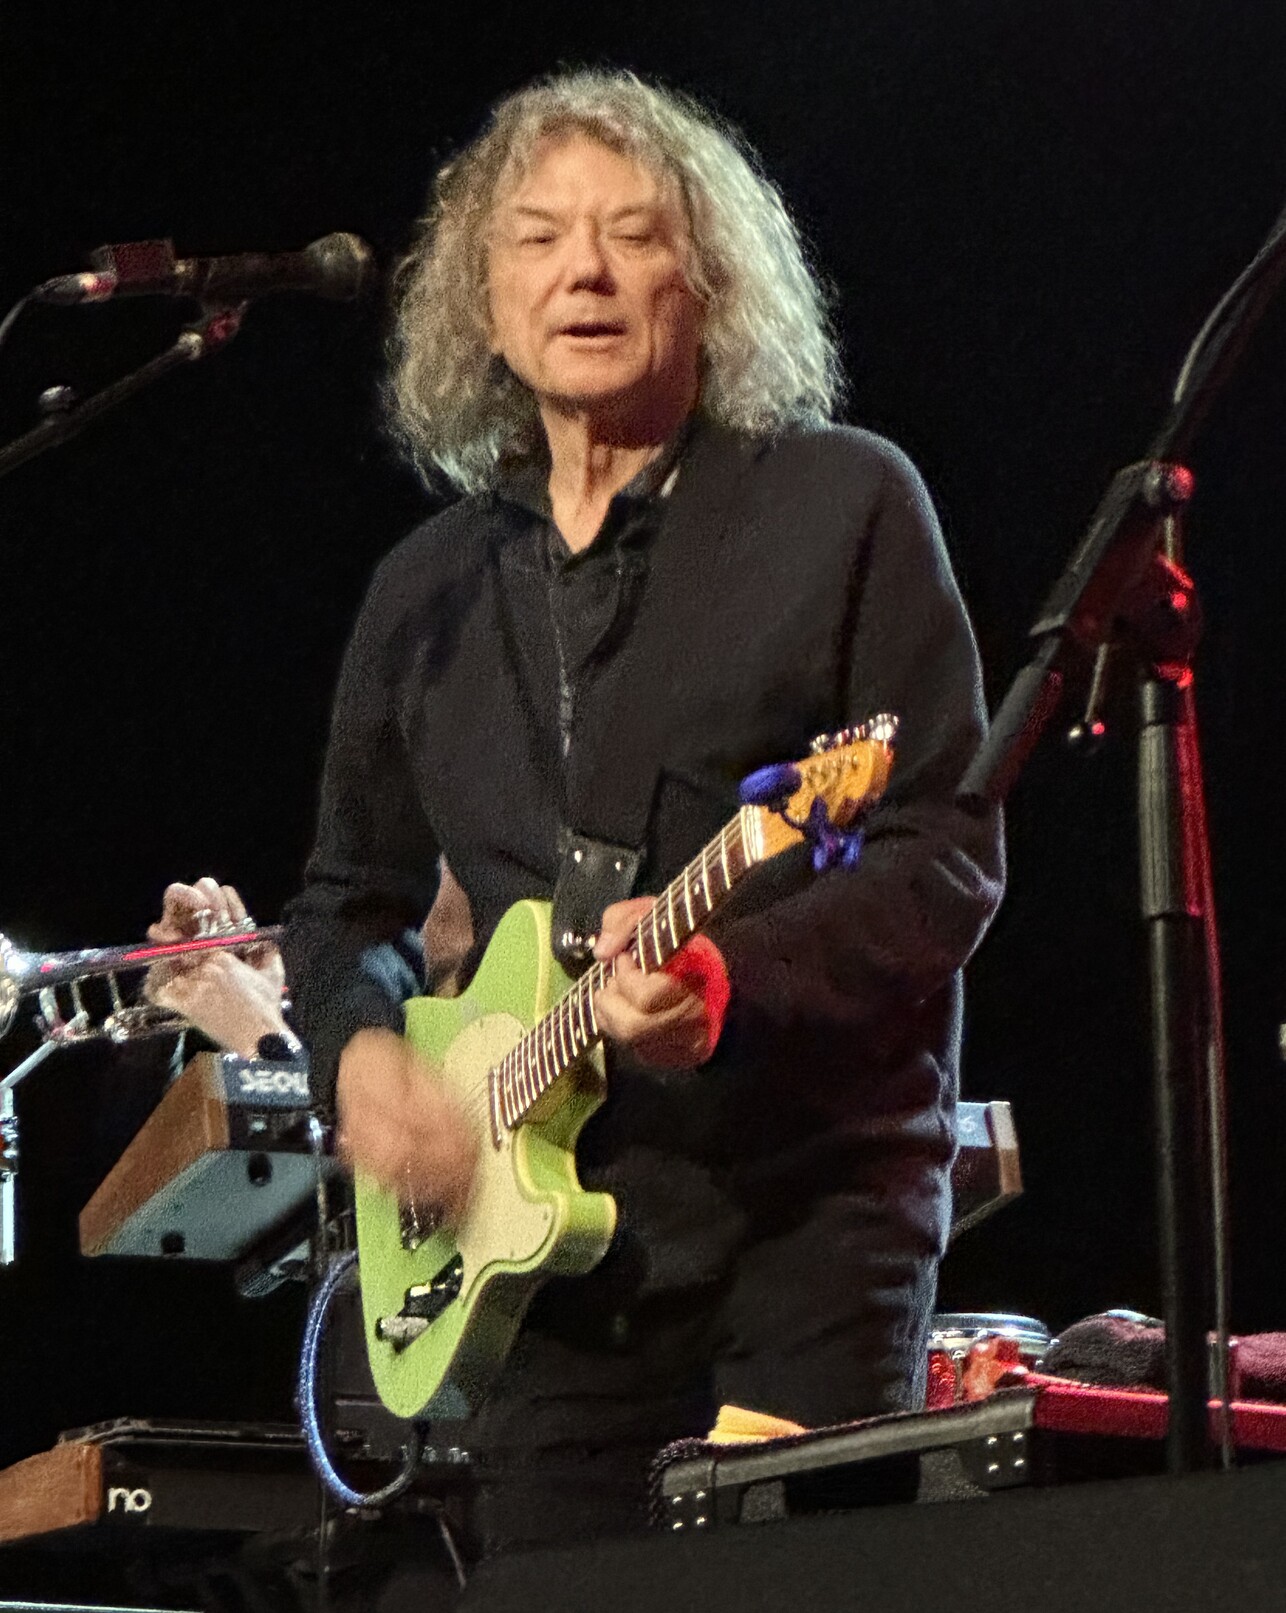 Jerry Harrison on stage playing a green guitar